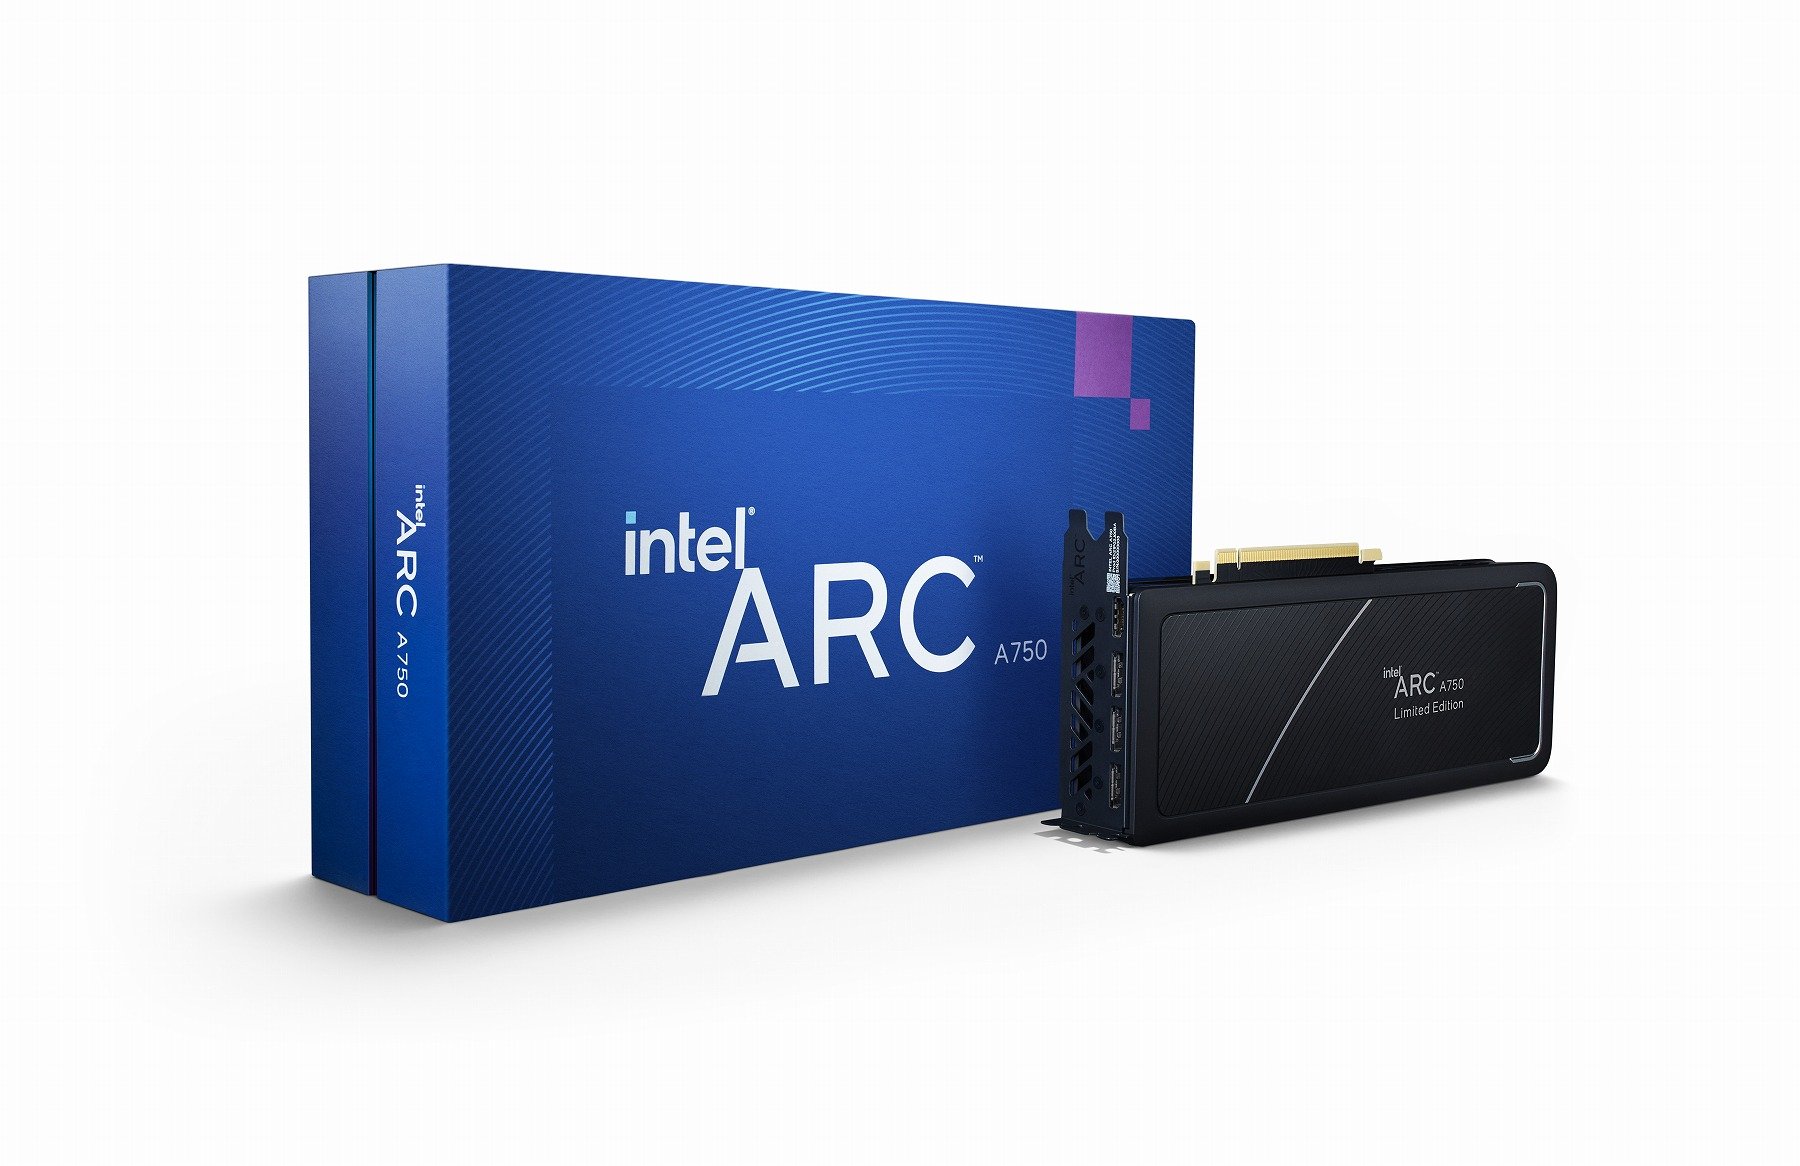 Intel Arc A770 Launched at USD $329, Available from October 12